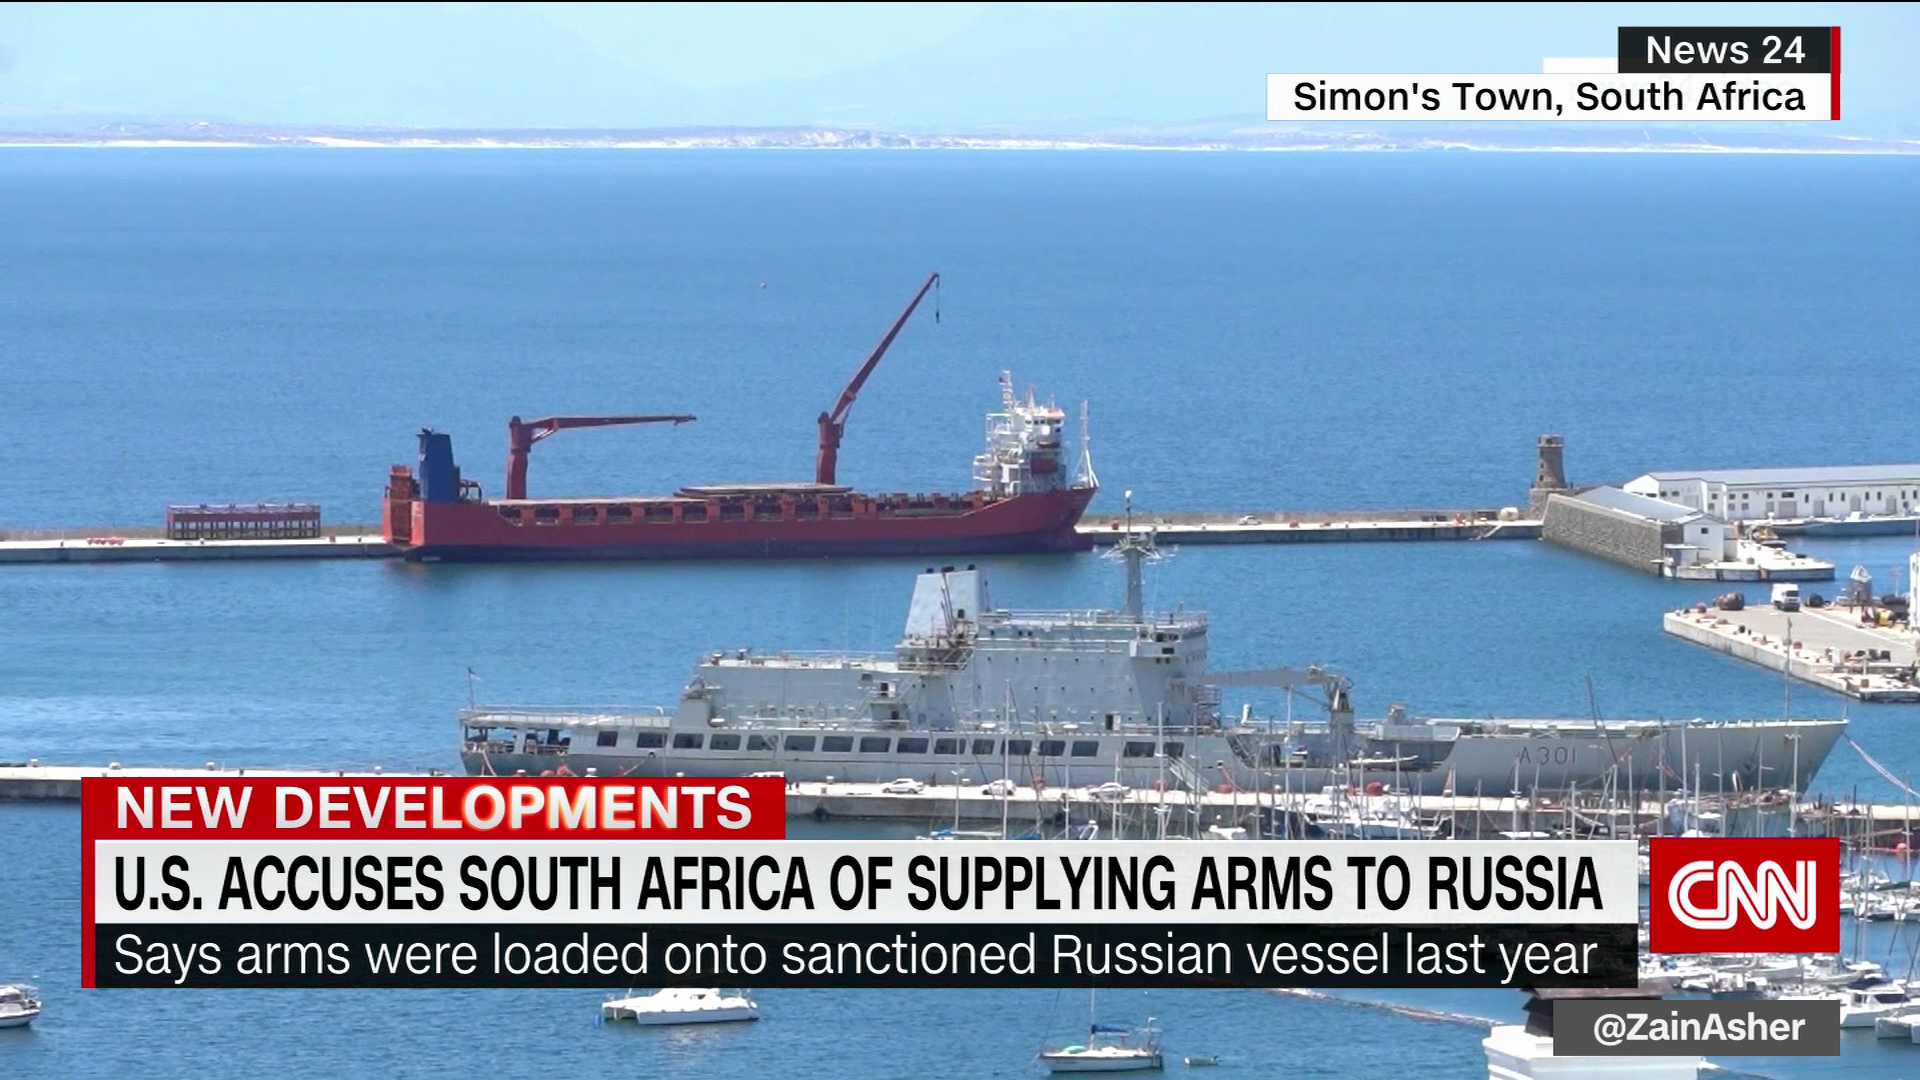 U.S. ambassador accuses South Africa of supplying arms to Russia | CNN